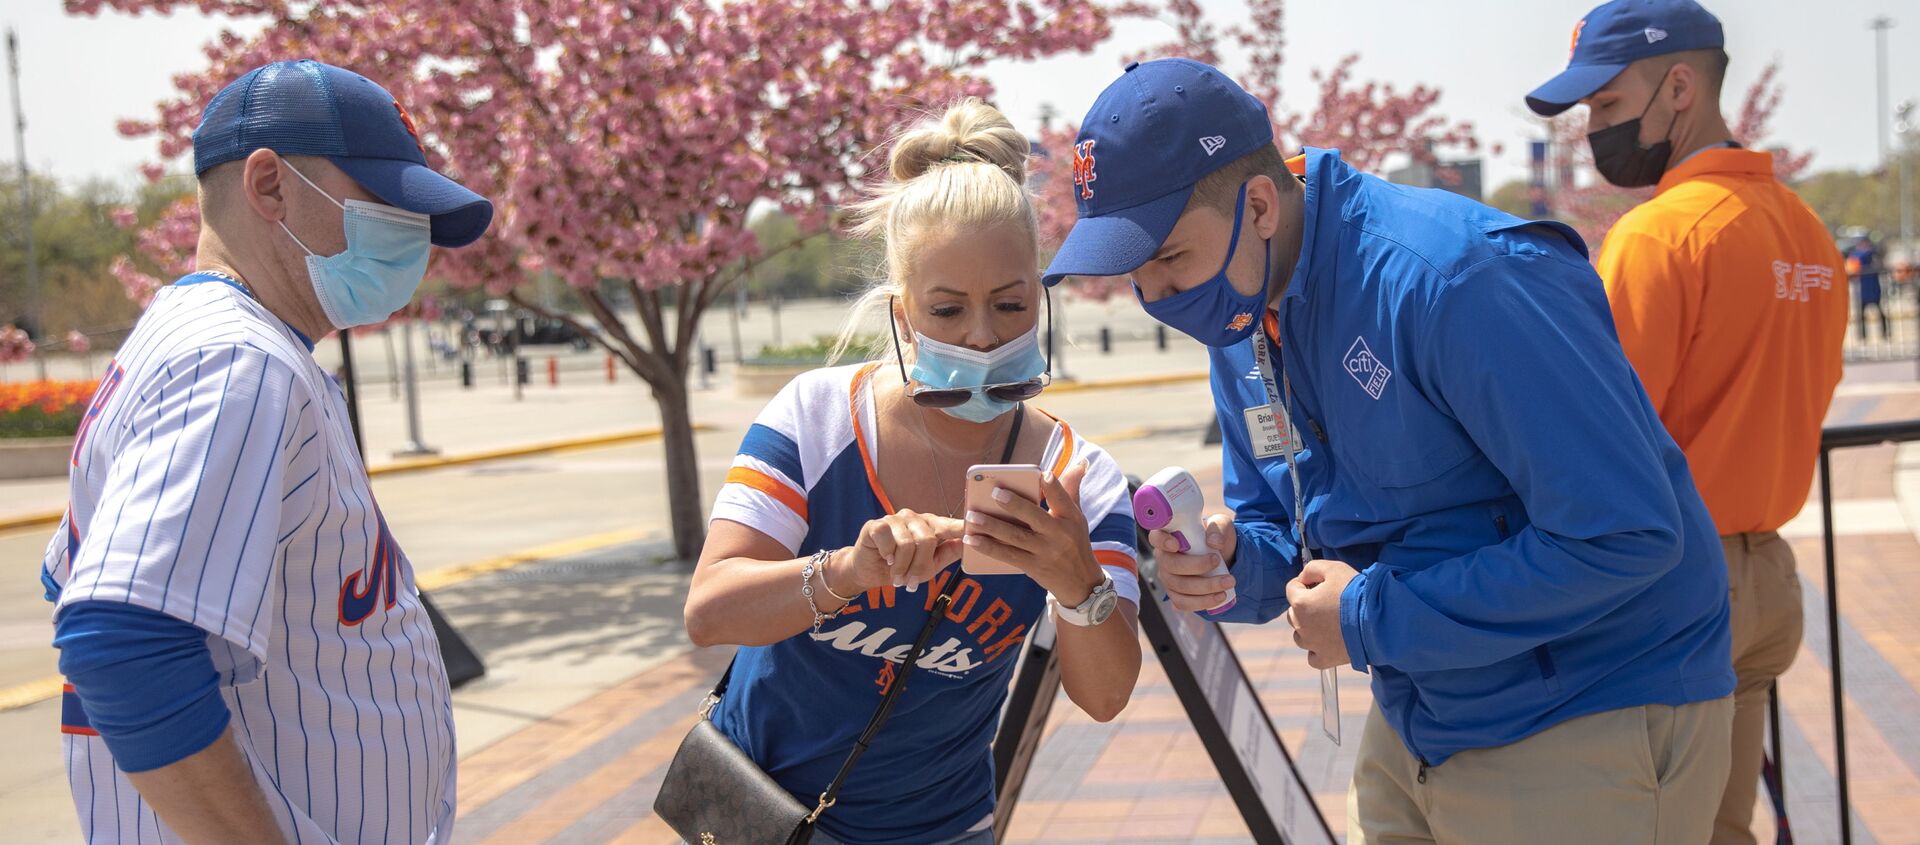 A fan shows a vaccine passport on her phone as she arrives for a New York Mets game, during the coronavirus disease (COVID-19) pandemic, at Citi Field in the Queens borough of New York City, U.S., April 24, 2021 - Sputnik International, 1920